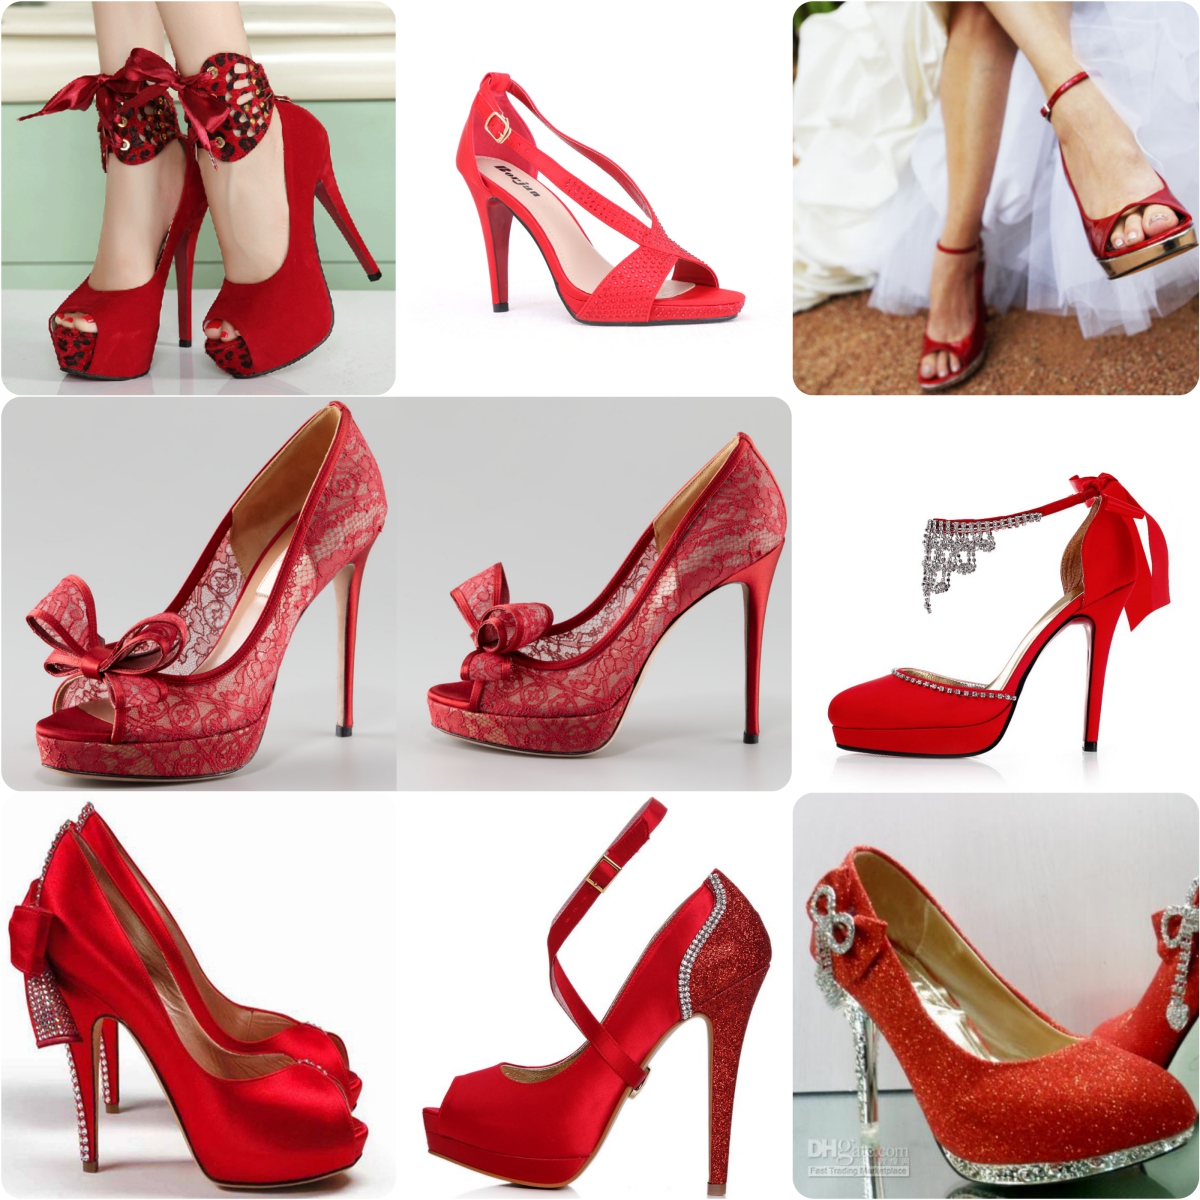 Fancy Red Color Bridal Shoes Wedding 2021-2022 Collection